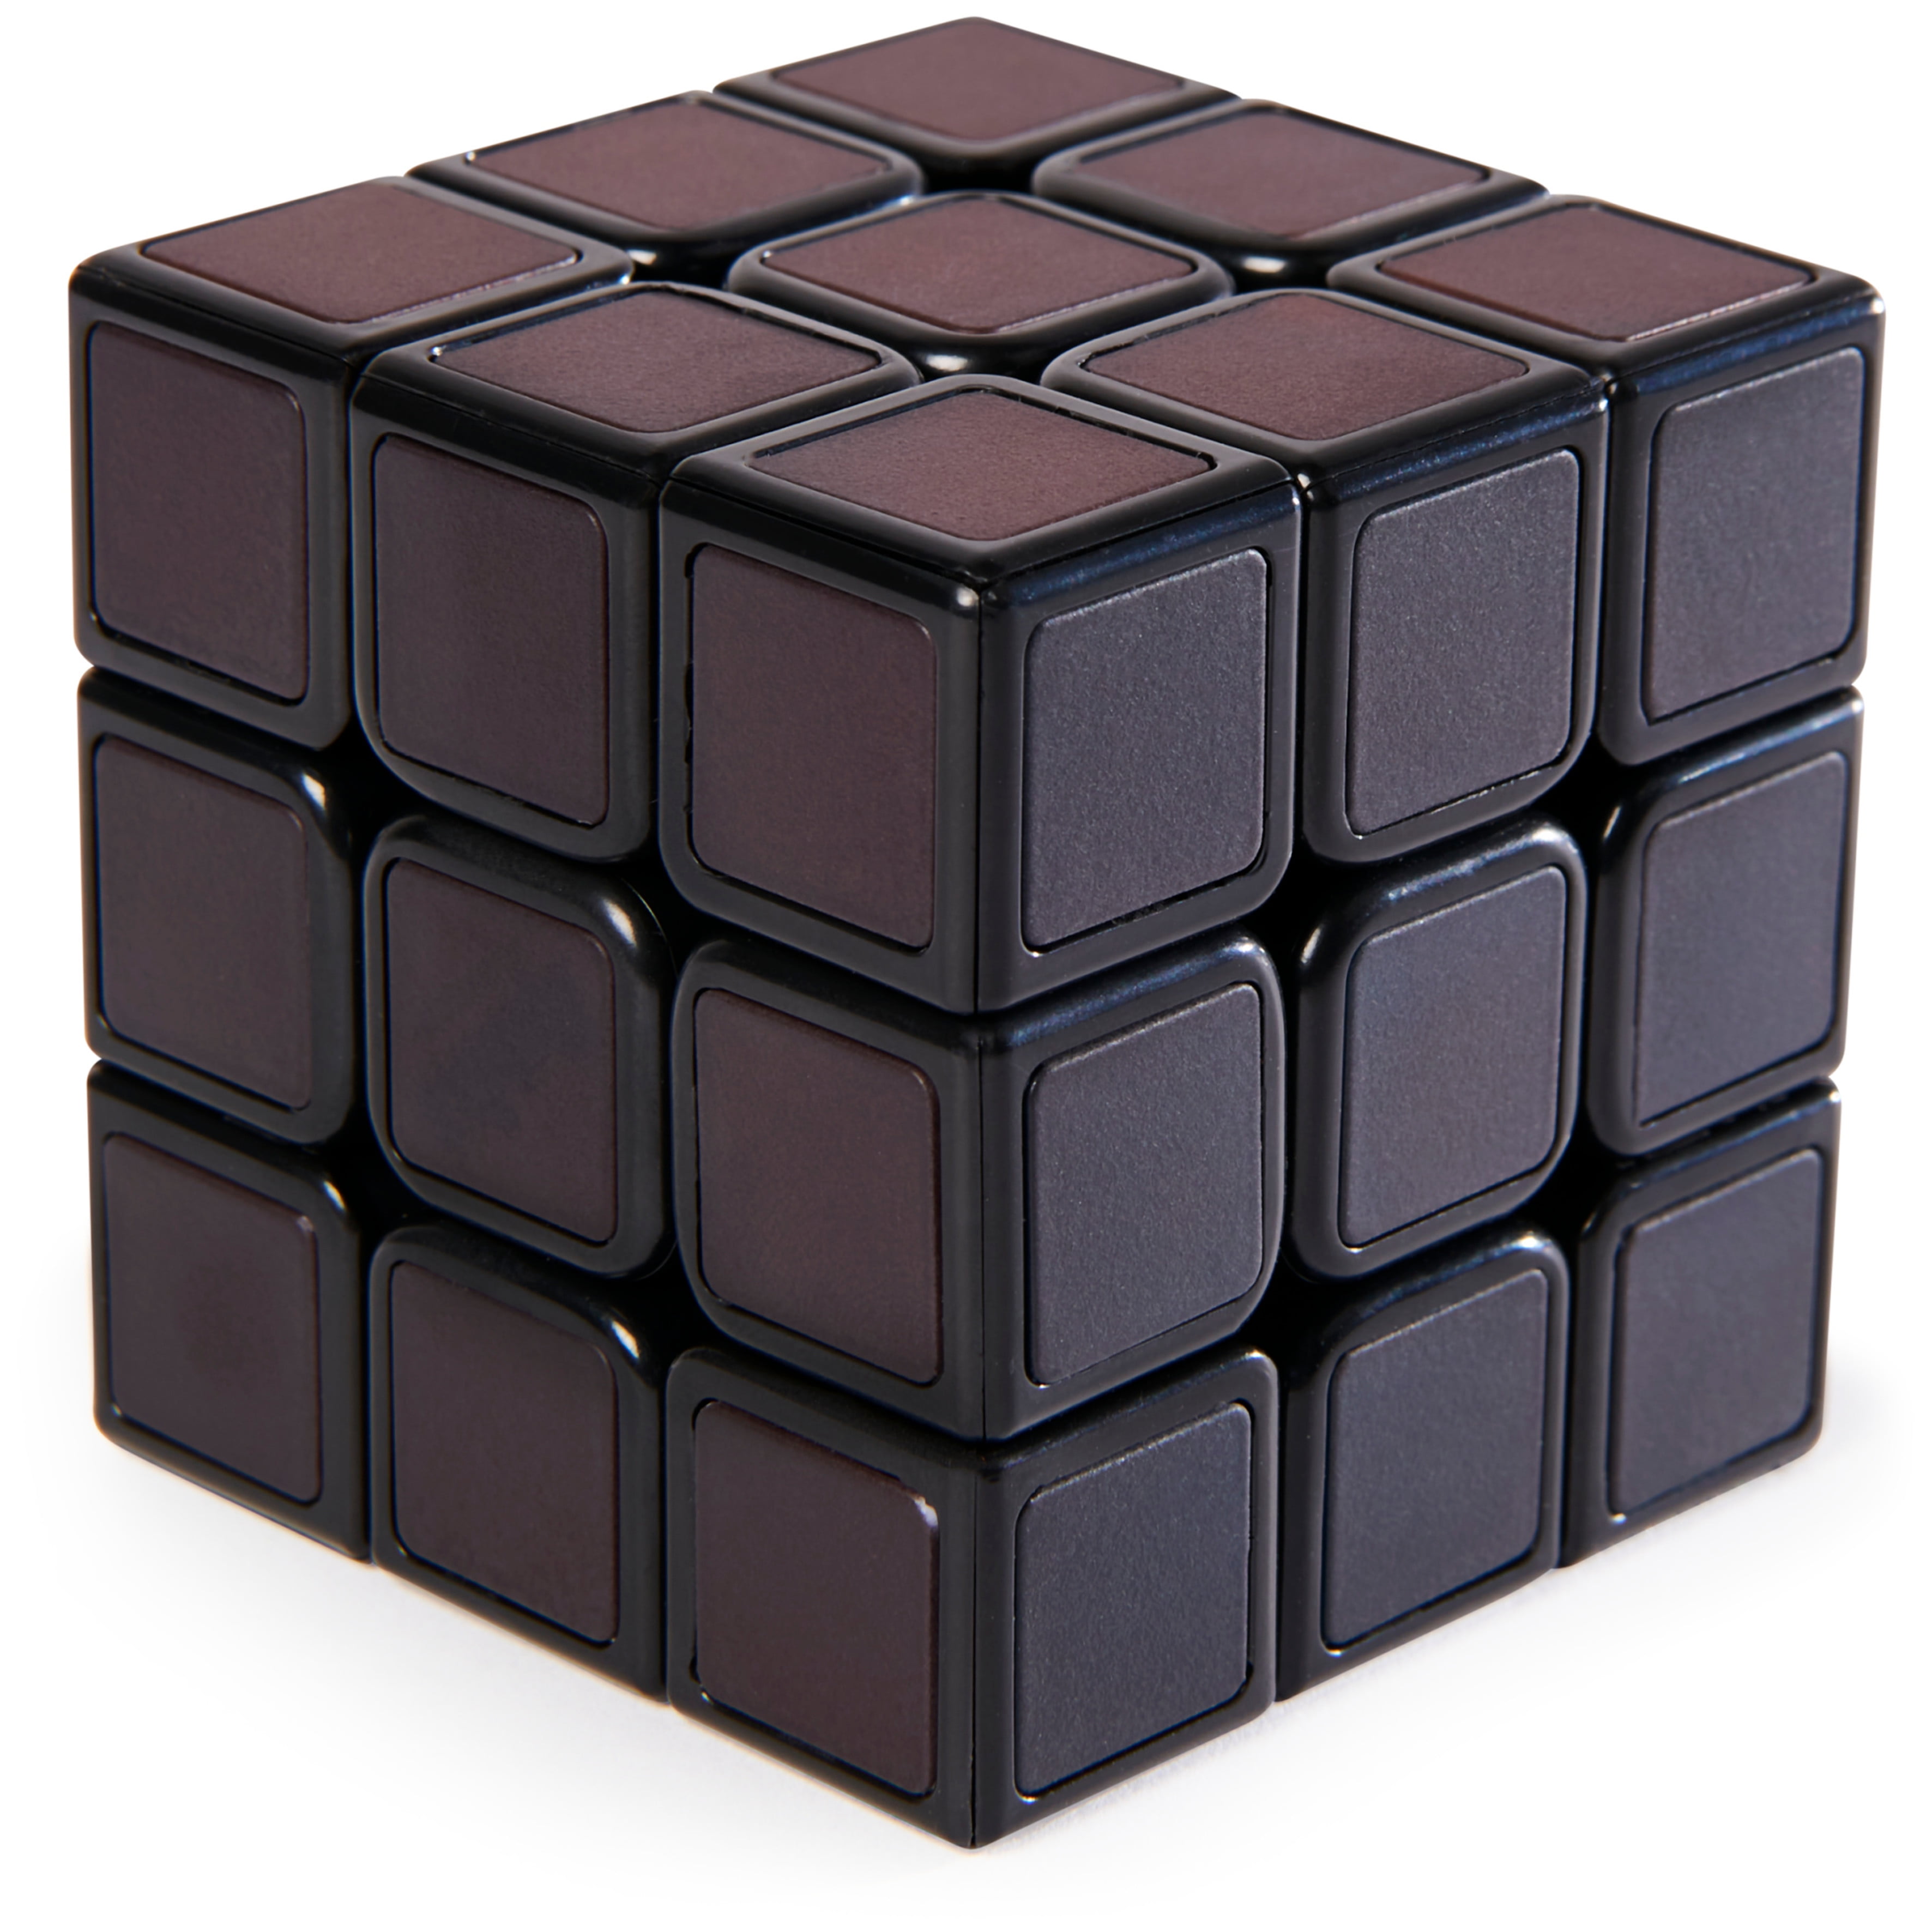 Rubiks Phantom, 3x3 Cube Advanced Puzzle Game, for Ages 8 and up